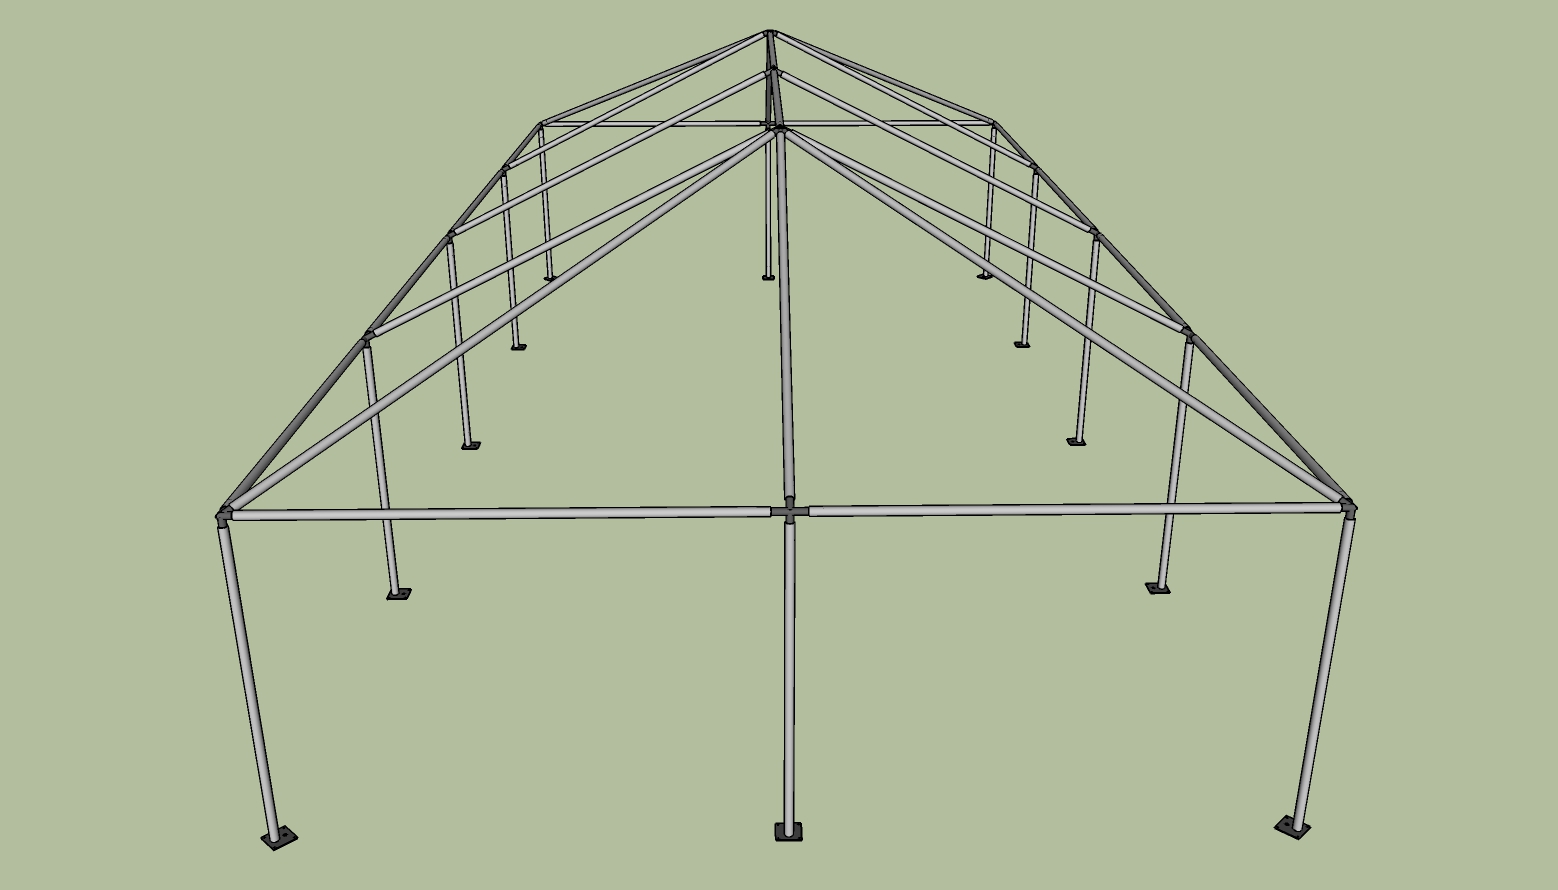 20x40 frame tent side view